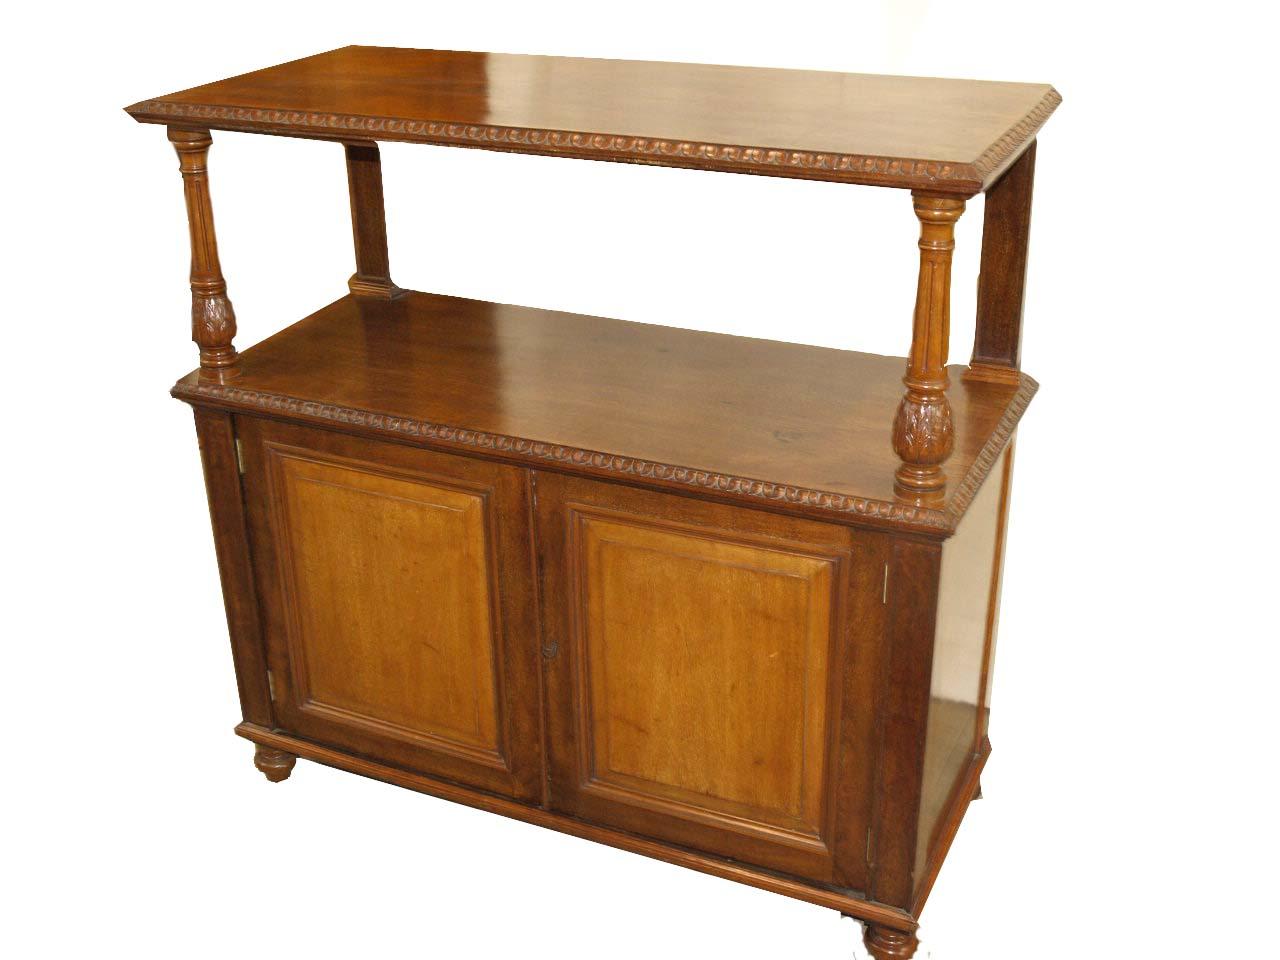 English Mahogany Two Tier Server In Good Condition For Sale In Wilson, NC